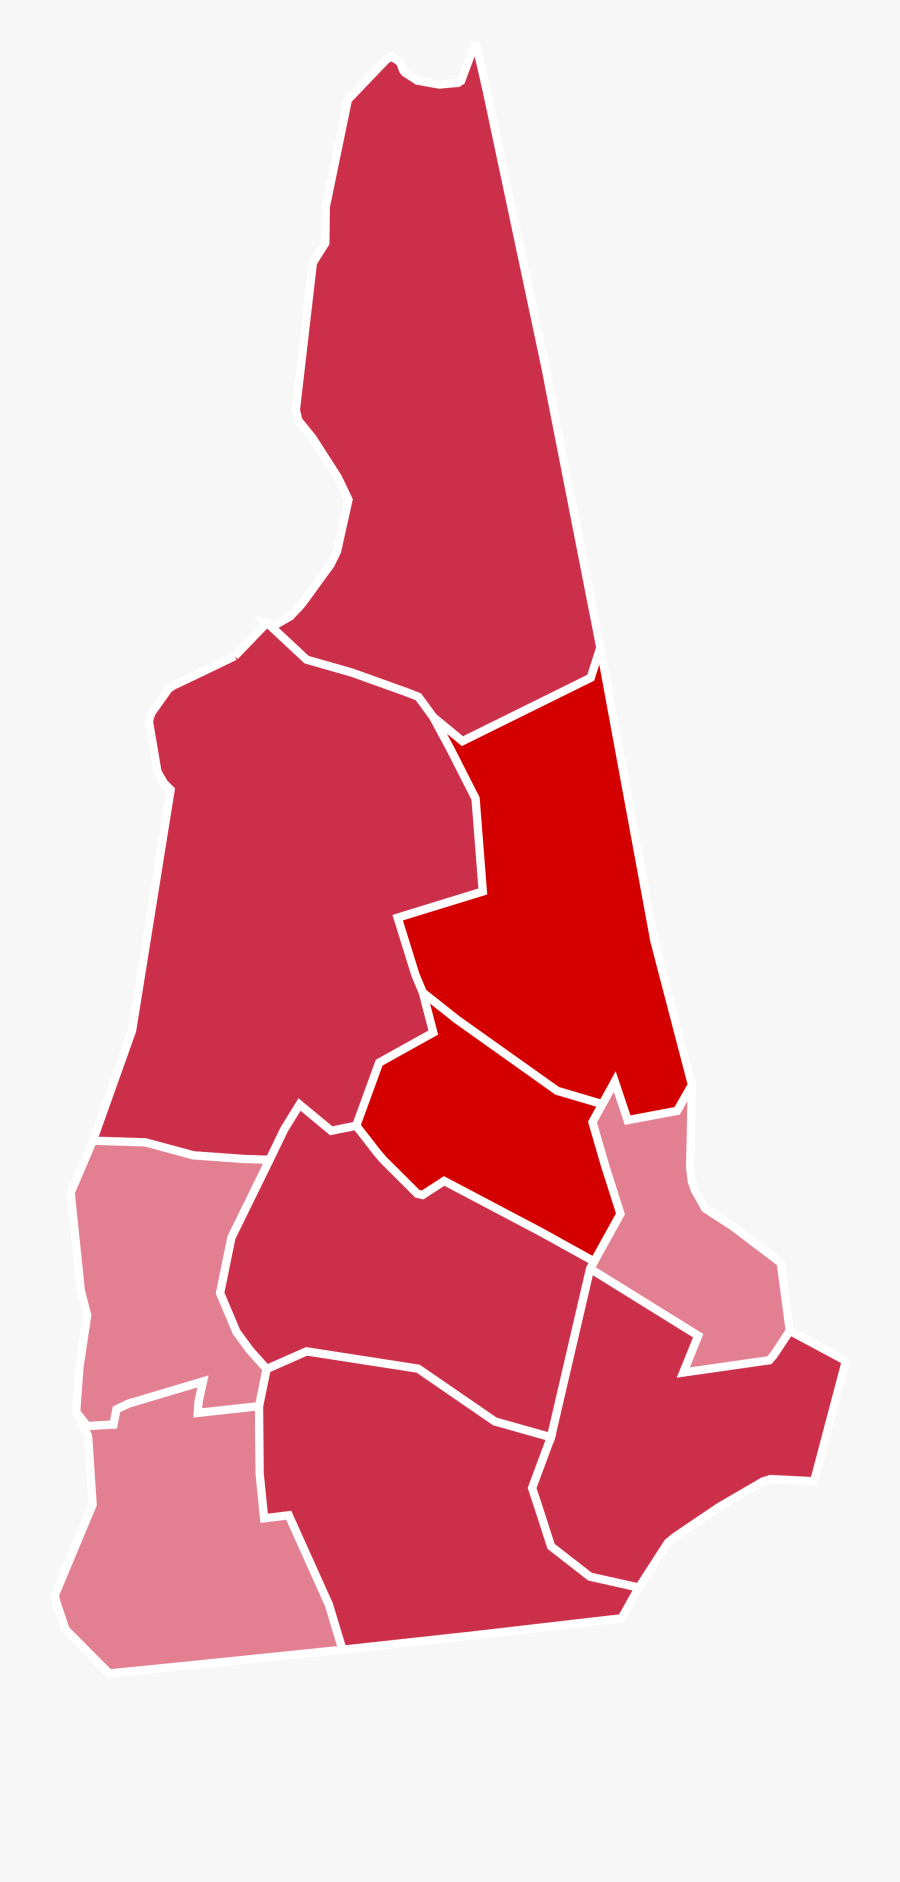 New Hampshire 2016 Election Results By County Clipart - New Hampshire 2016 Election Results By County, Transparent Clipart